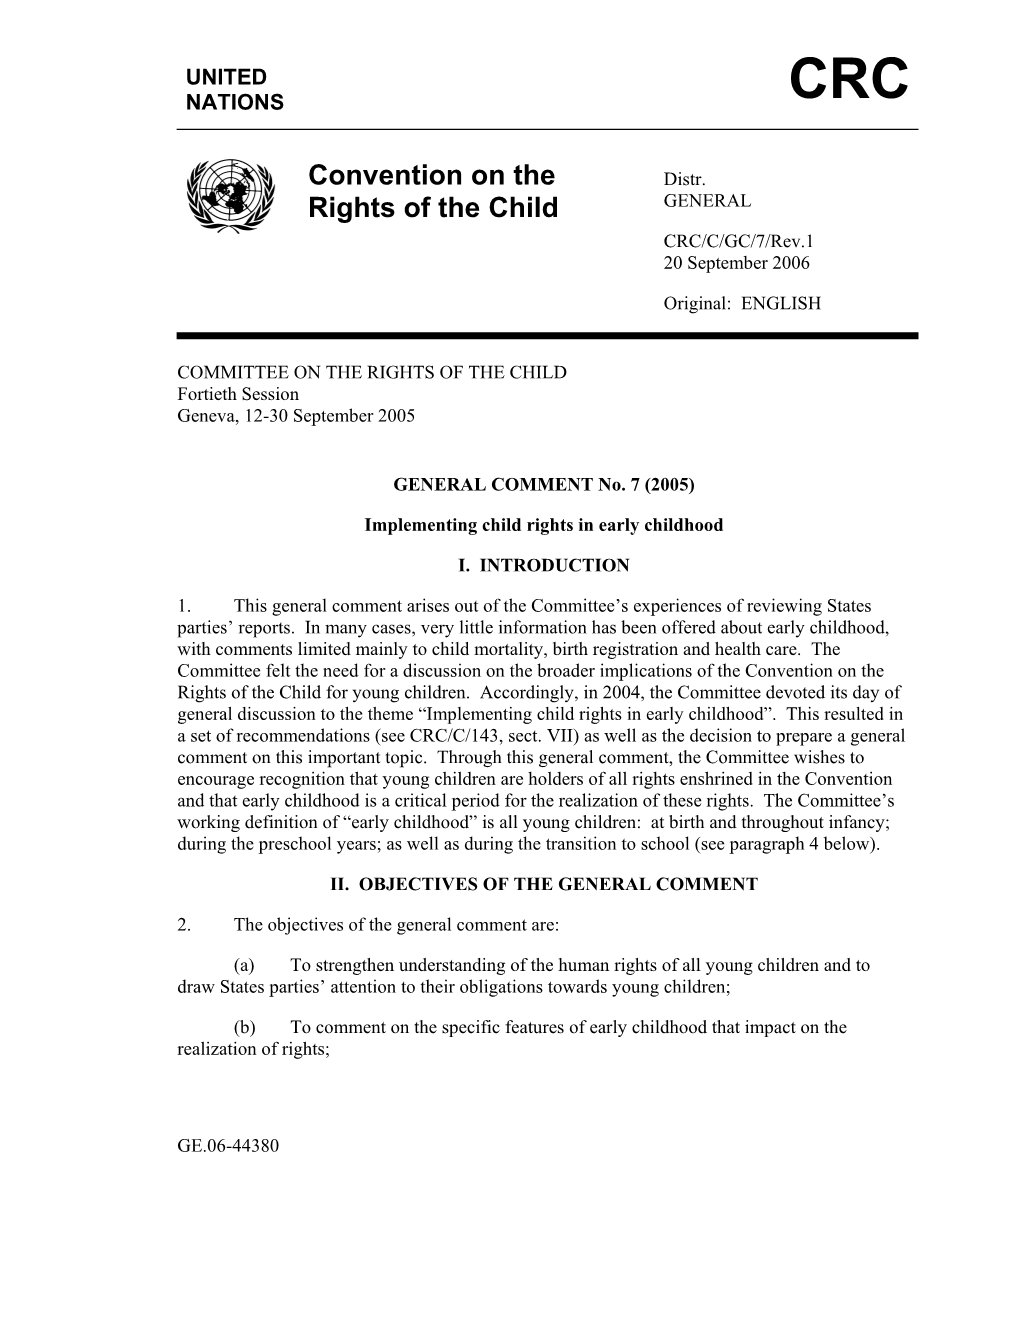 Convention on the Rights of the Child for Young Children